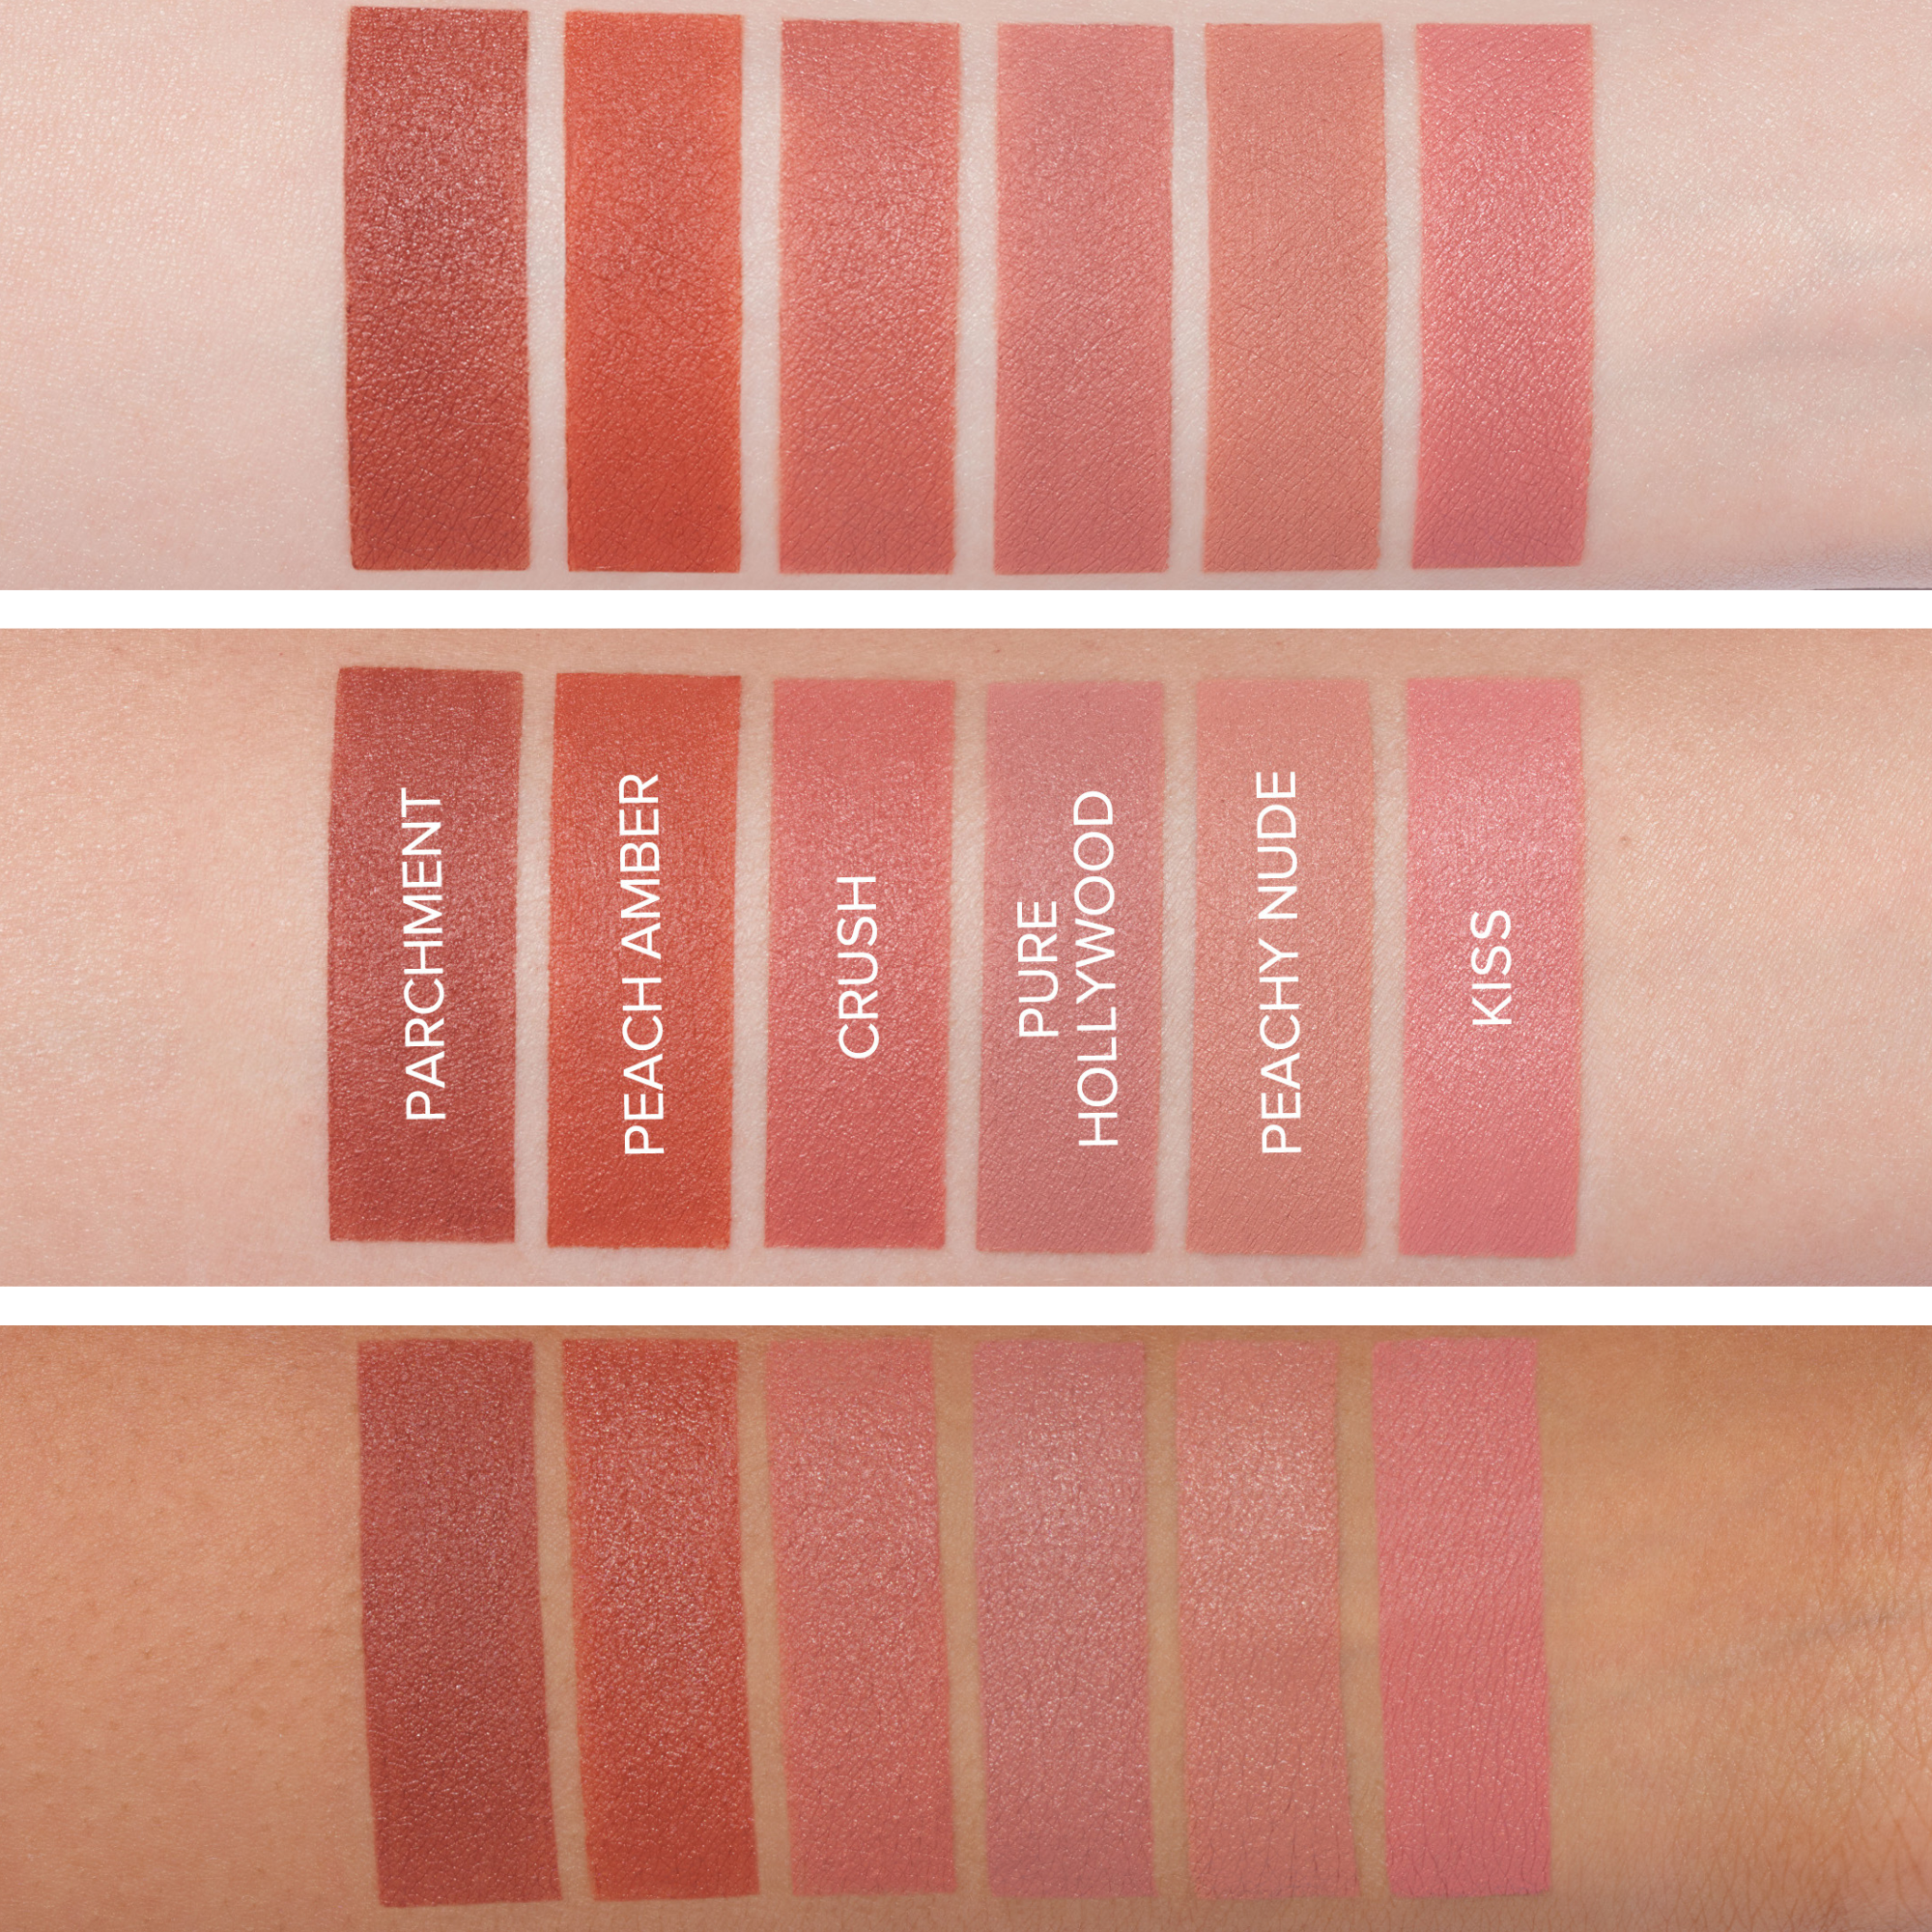 Parchment, Peach Amber, Crush, Pure Hollywood, Peachy Nude and Kiss.